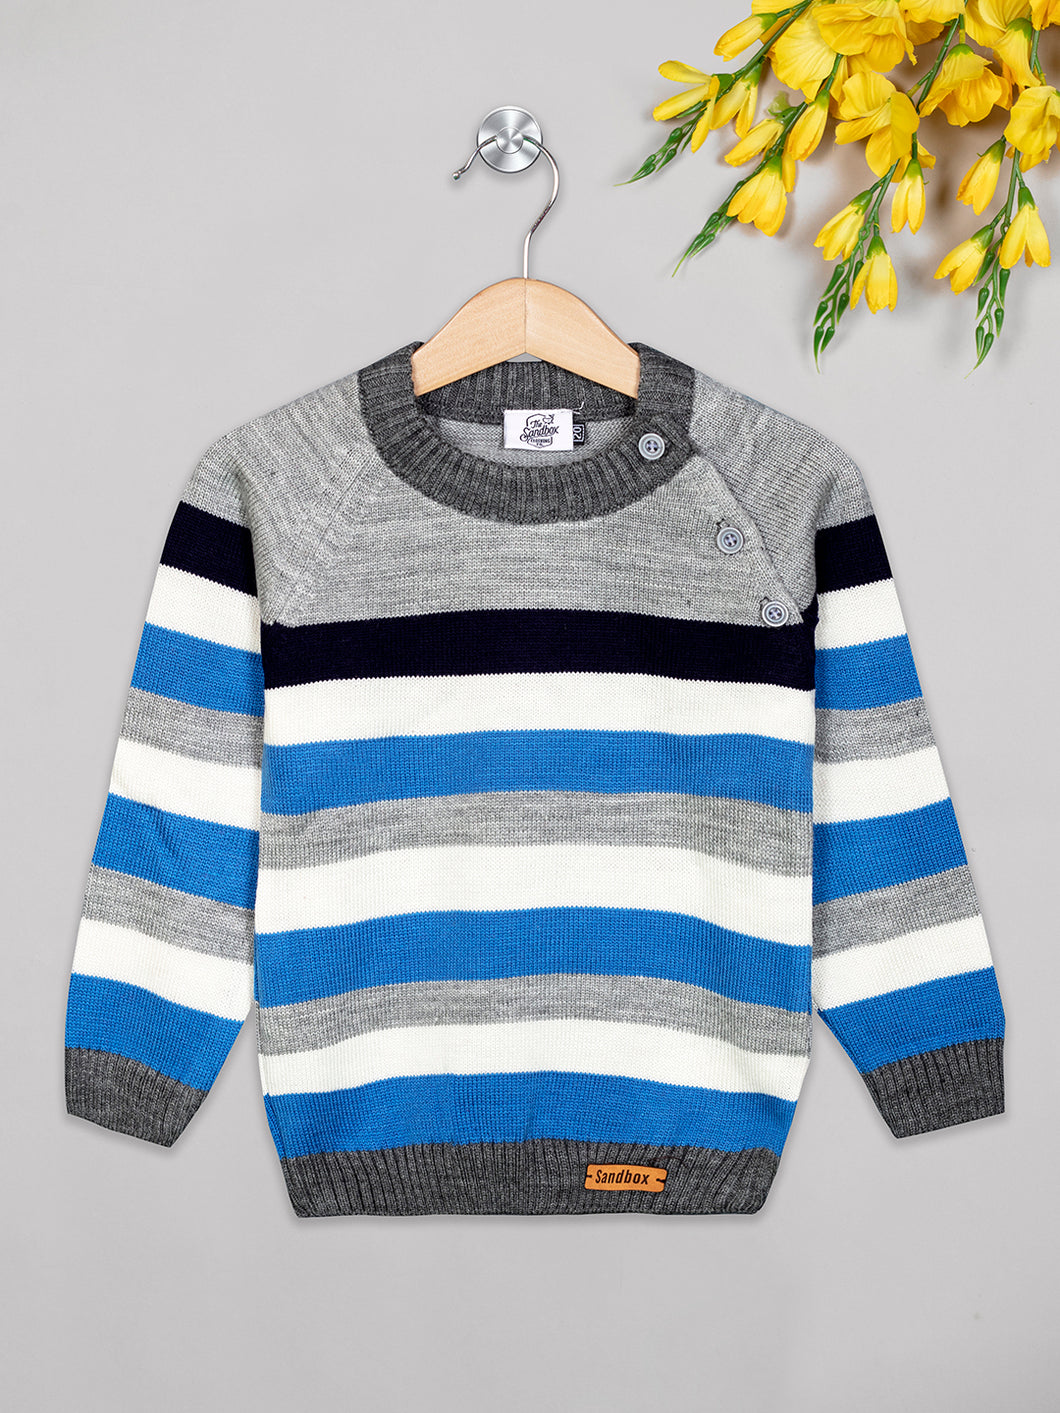 Boys winter woolen full sleeves round neck stripes sweater in grey, white and blue combinatin